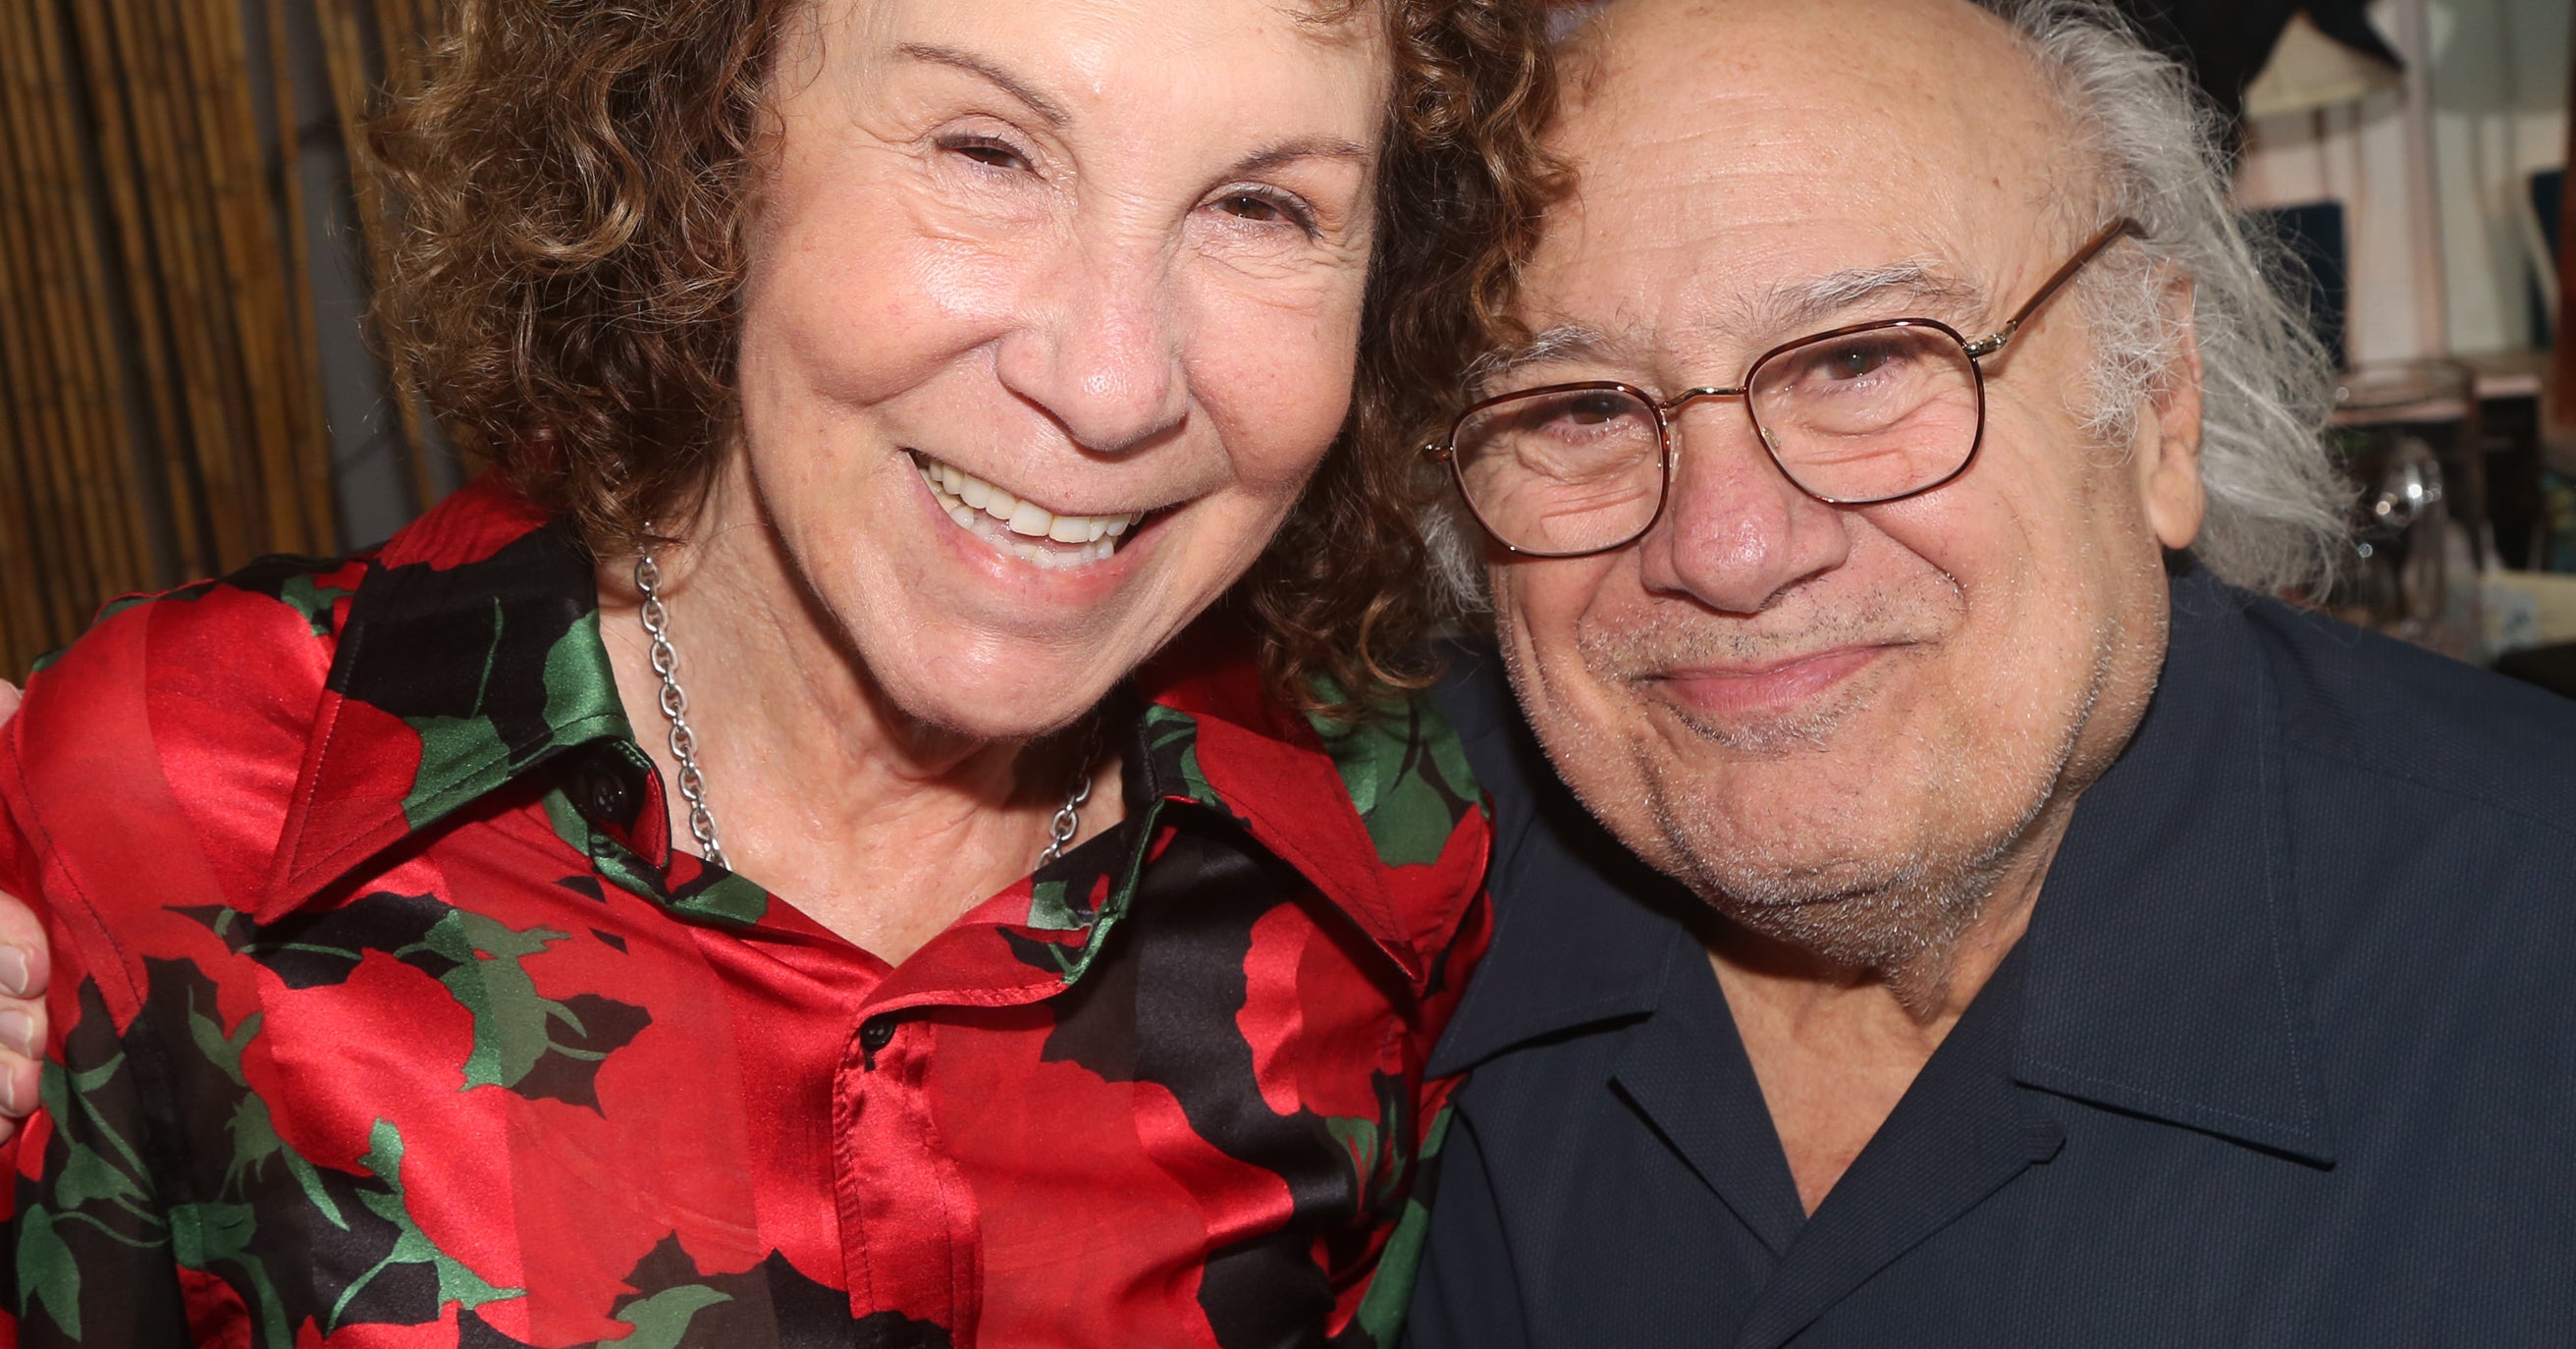 Danny DeVito Is Apparently “Too Chicken” To Ask His Estranged Wife Rhea Perlman To Give Their Marriage Another Go